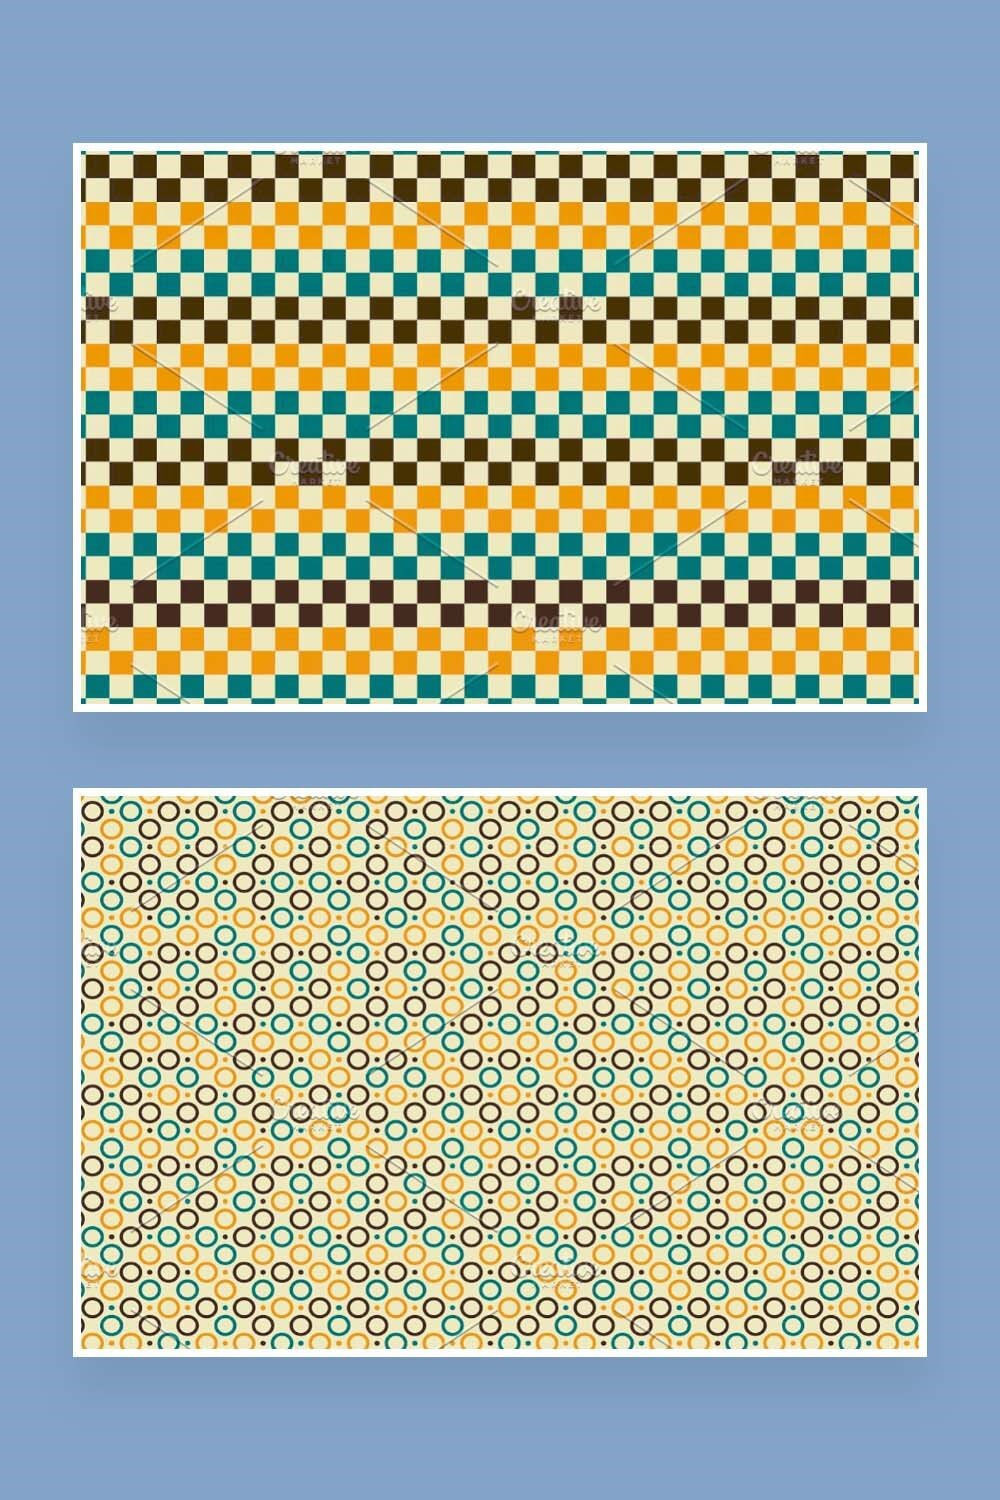 A collection of retro patterns on two pictures in the form of cubes and circles with dots.